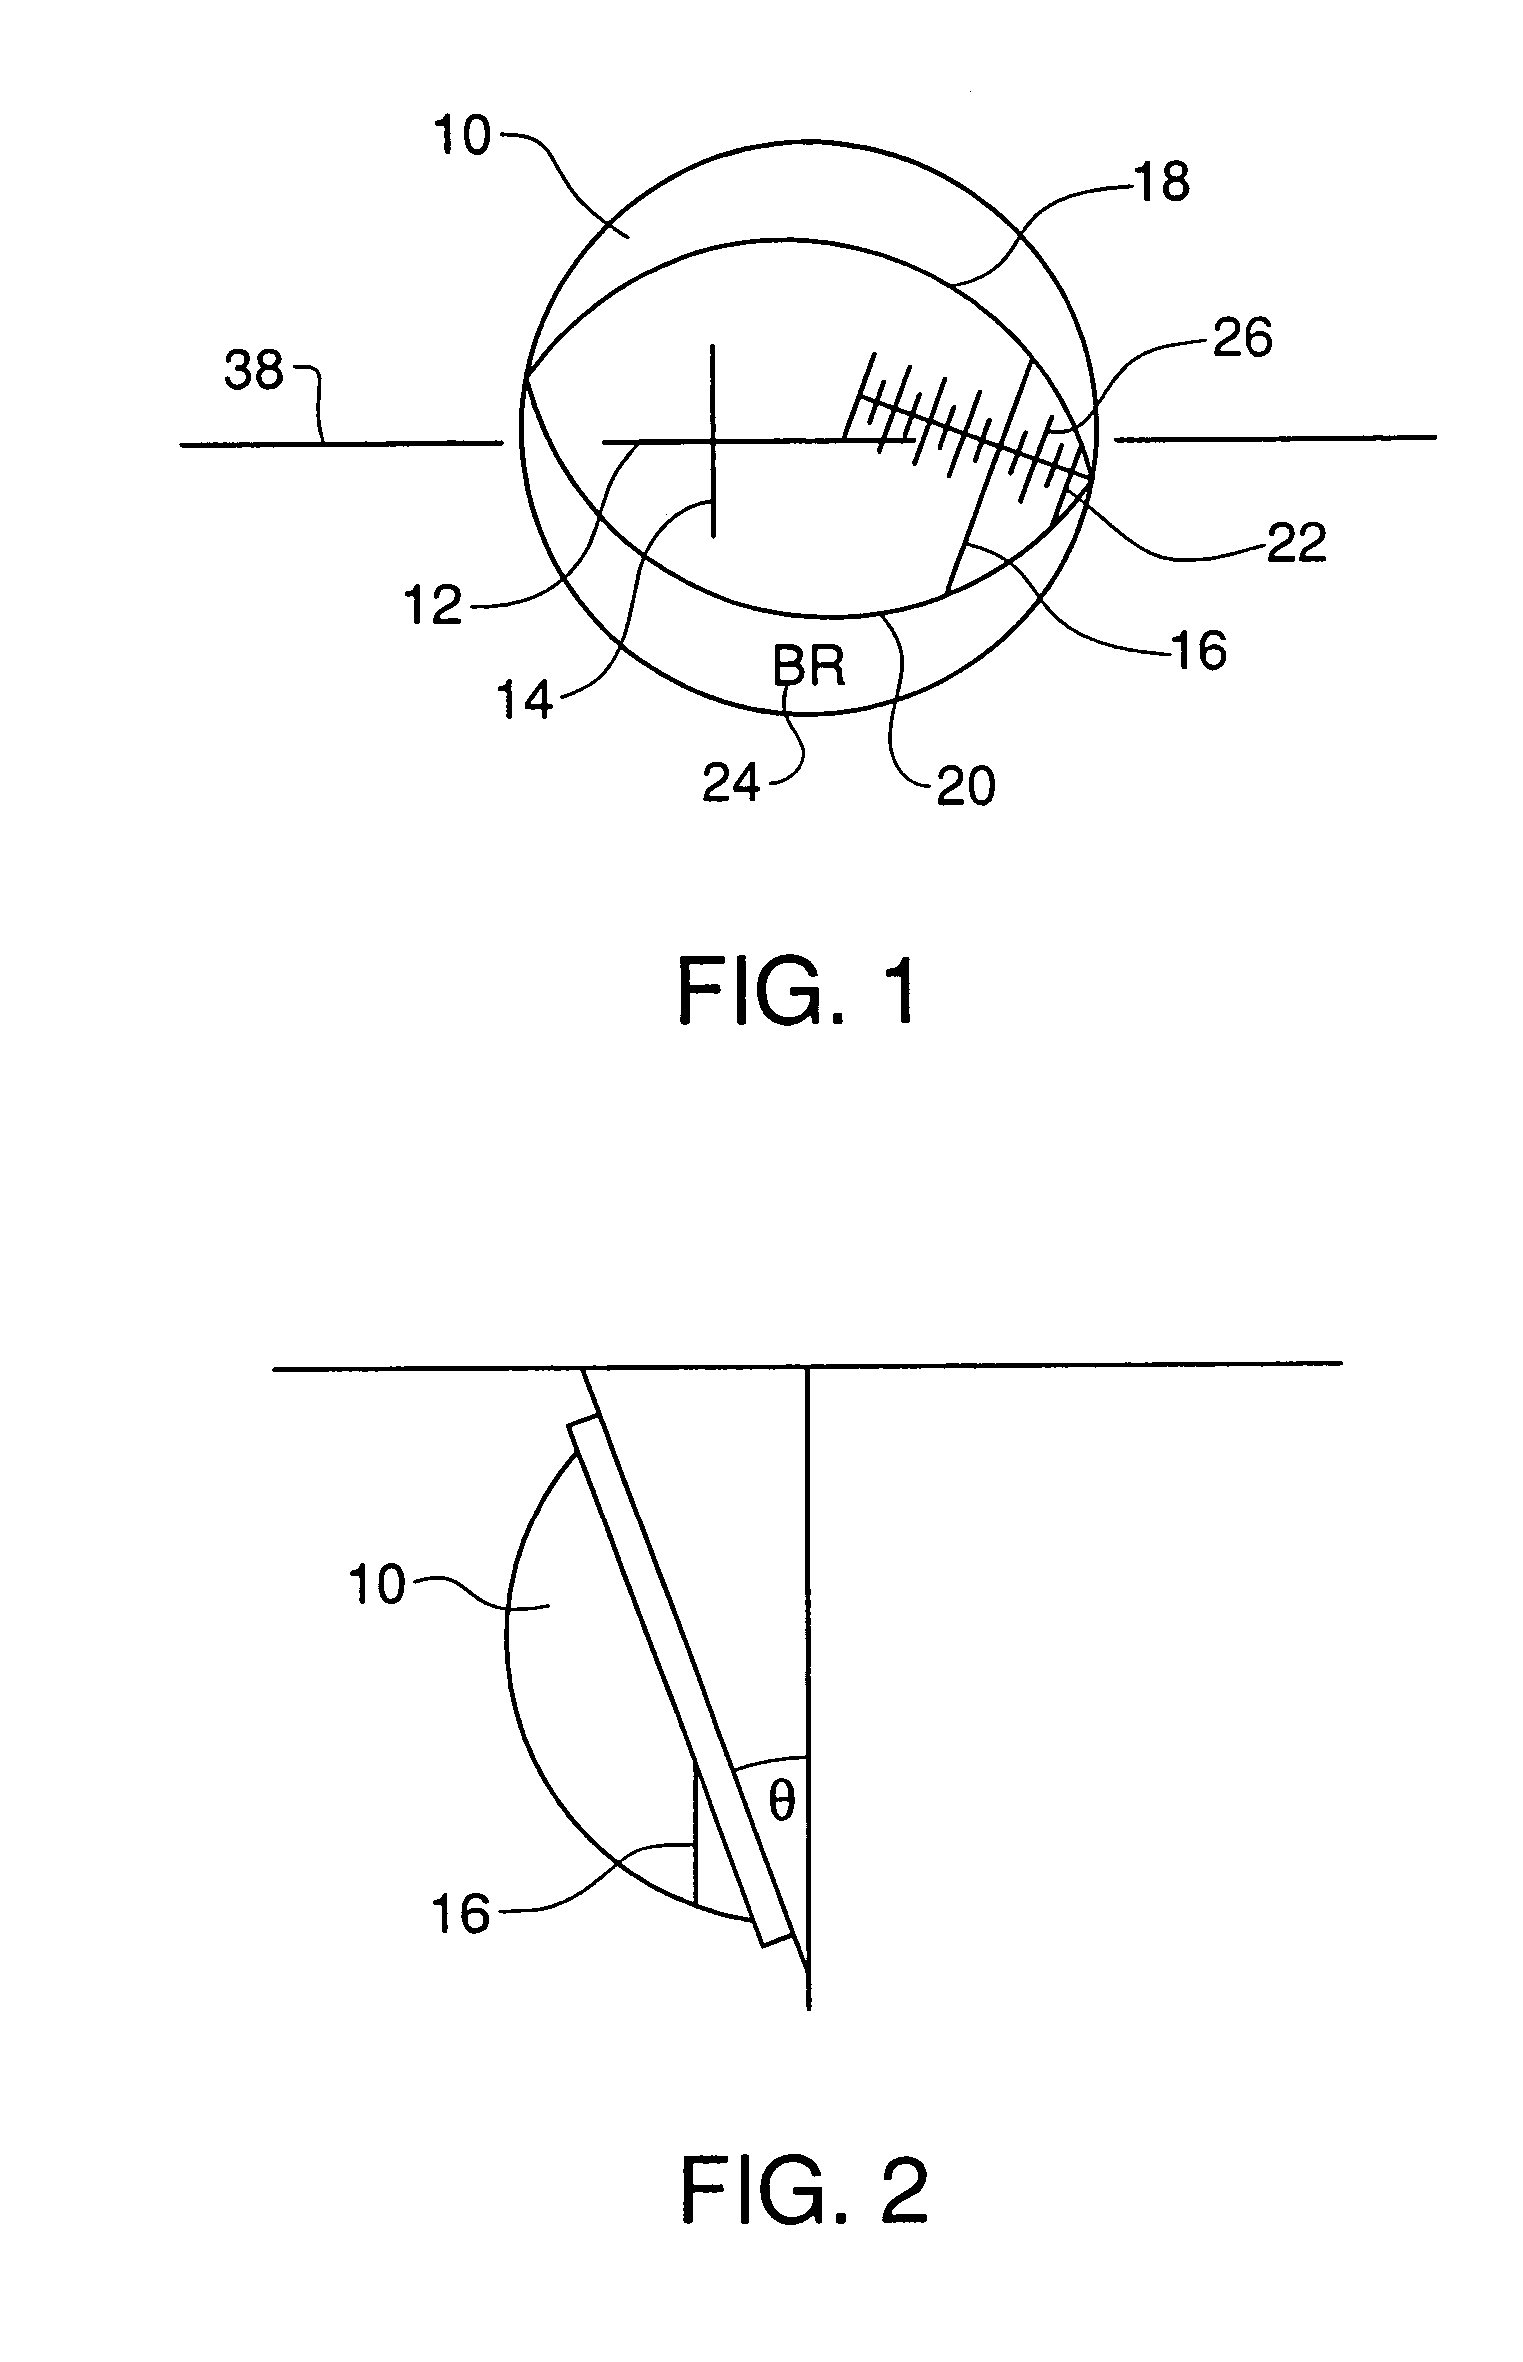 Methods and apparatus for proper installation and orientation of artificial eye or eyepiece insert onto a taxidermy mannequin or life-like sculpture